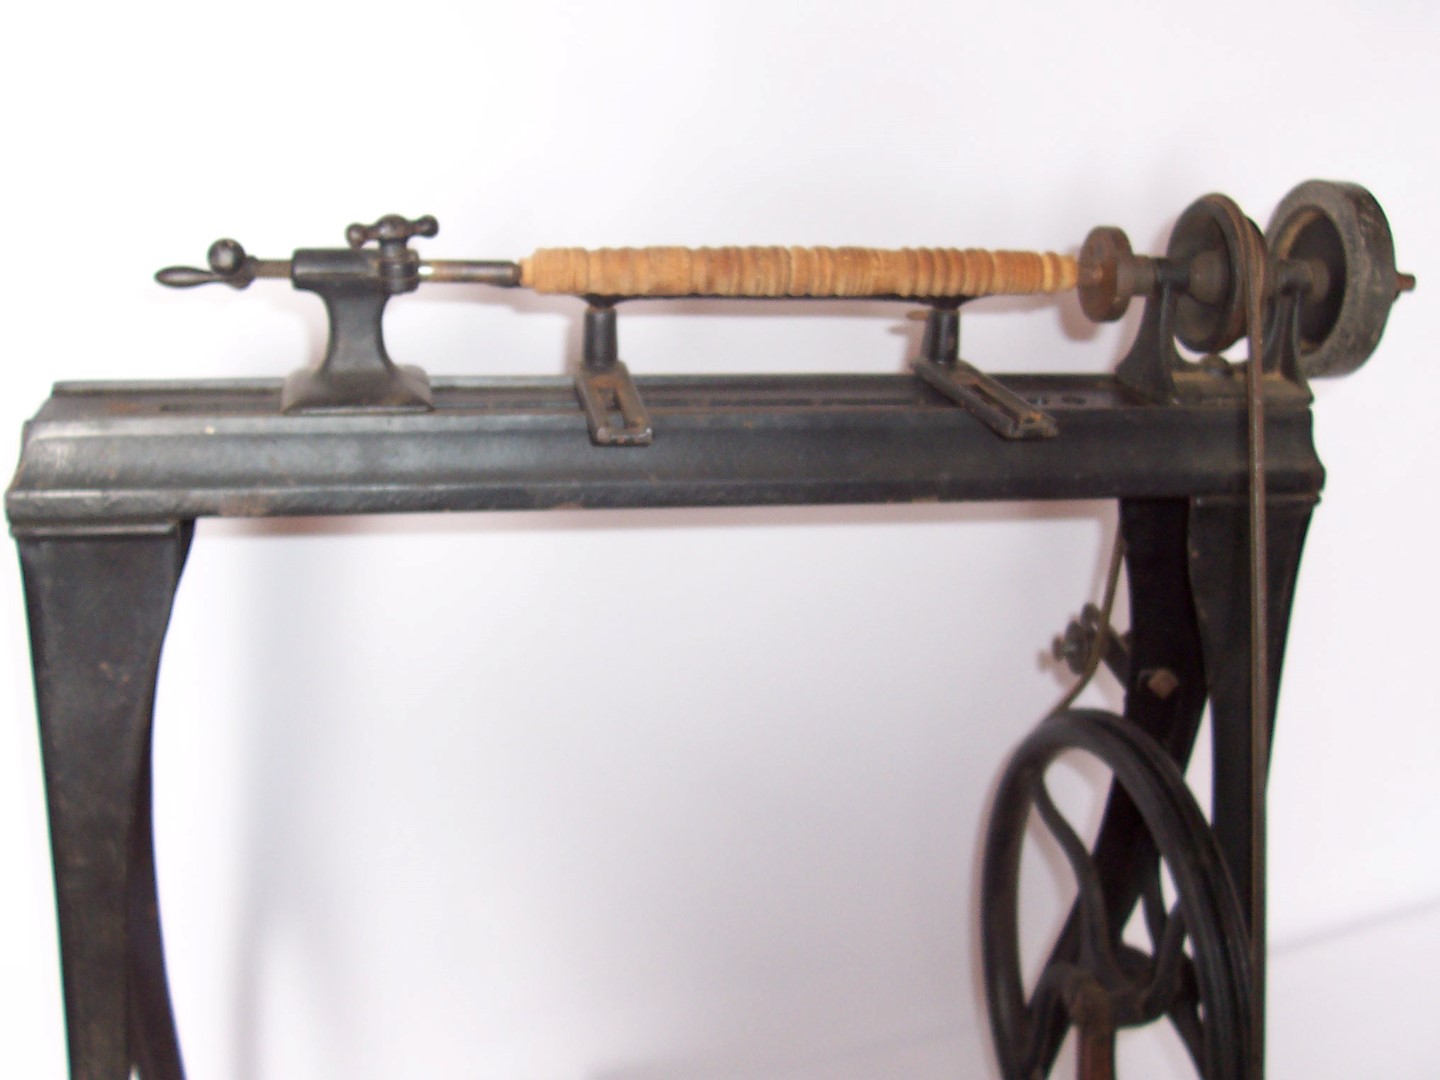 Millers Falls Antique Treadle Wood Lathe Goodell Improved 